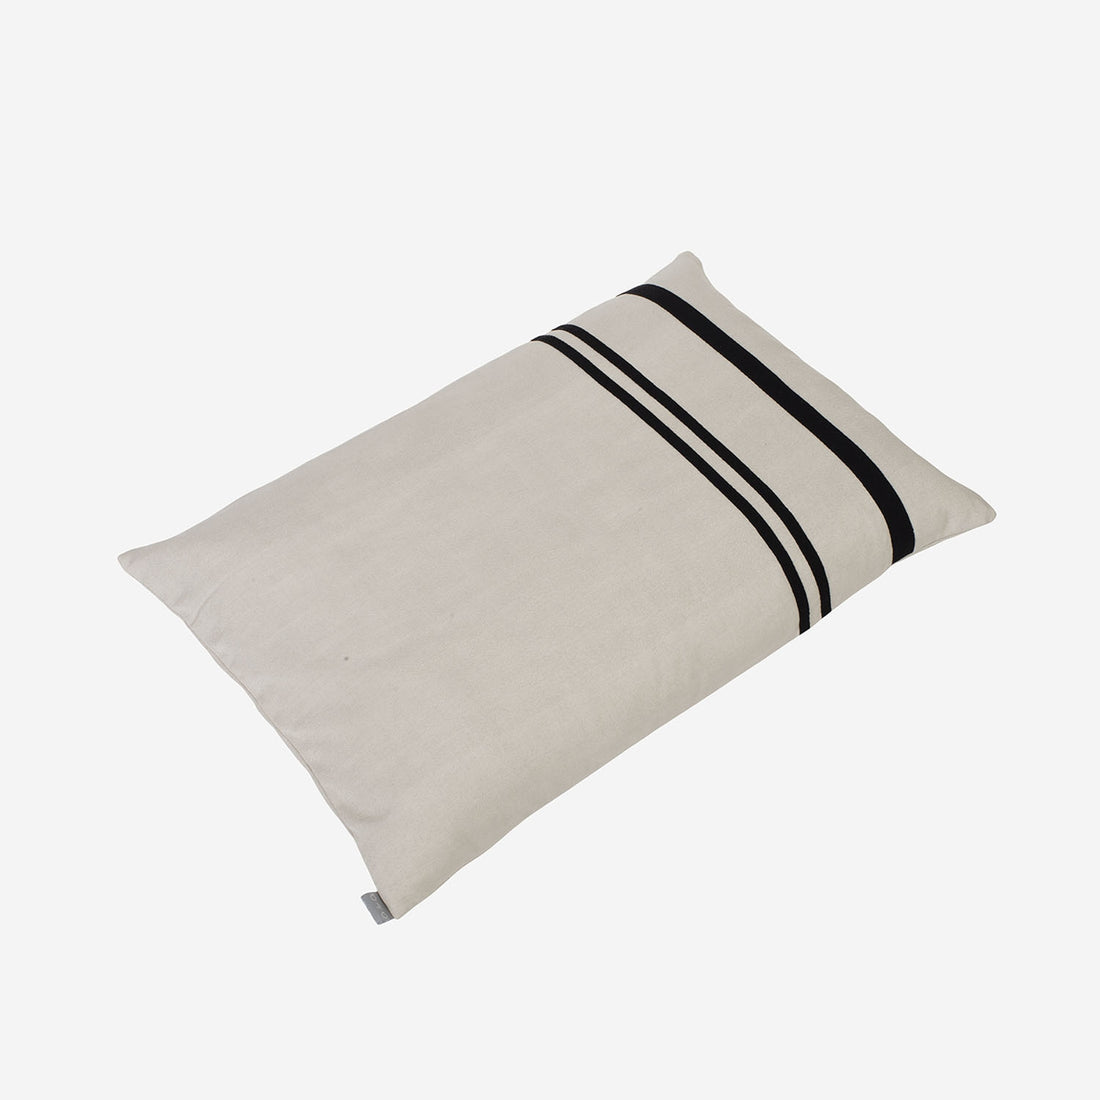 Pillow Cover in RawSilk Sand Color with Wide and Thin Black Ribbon